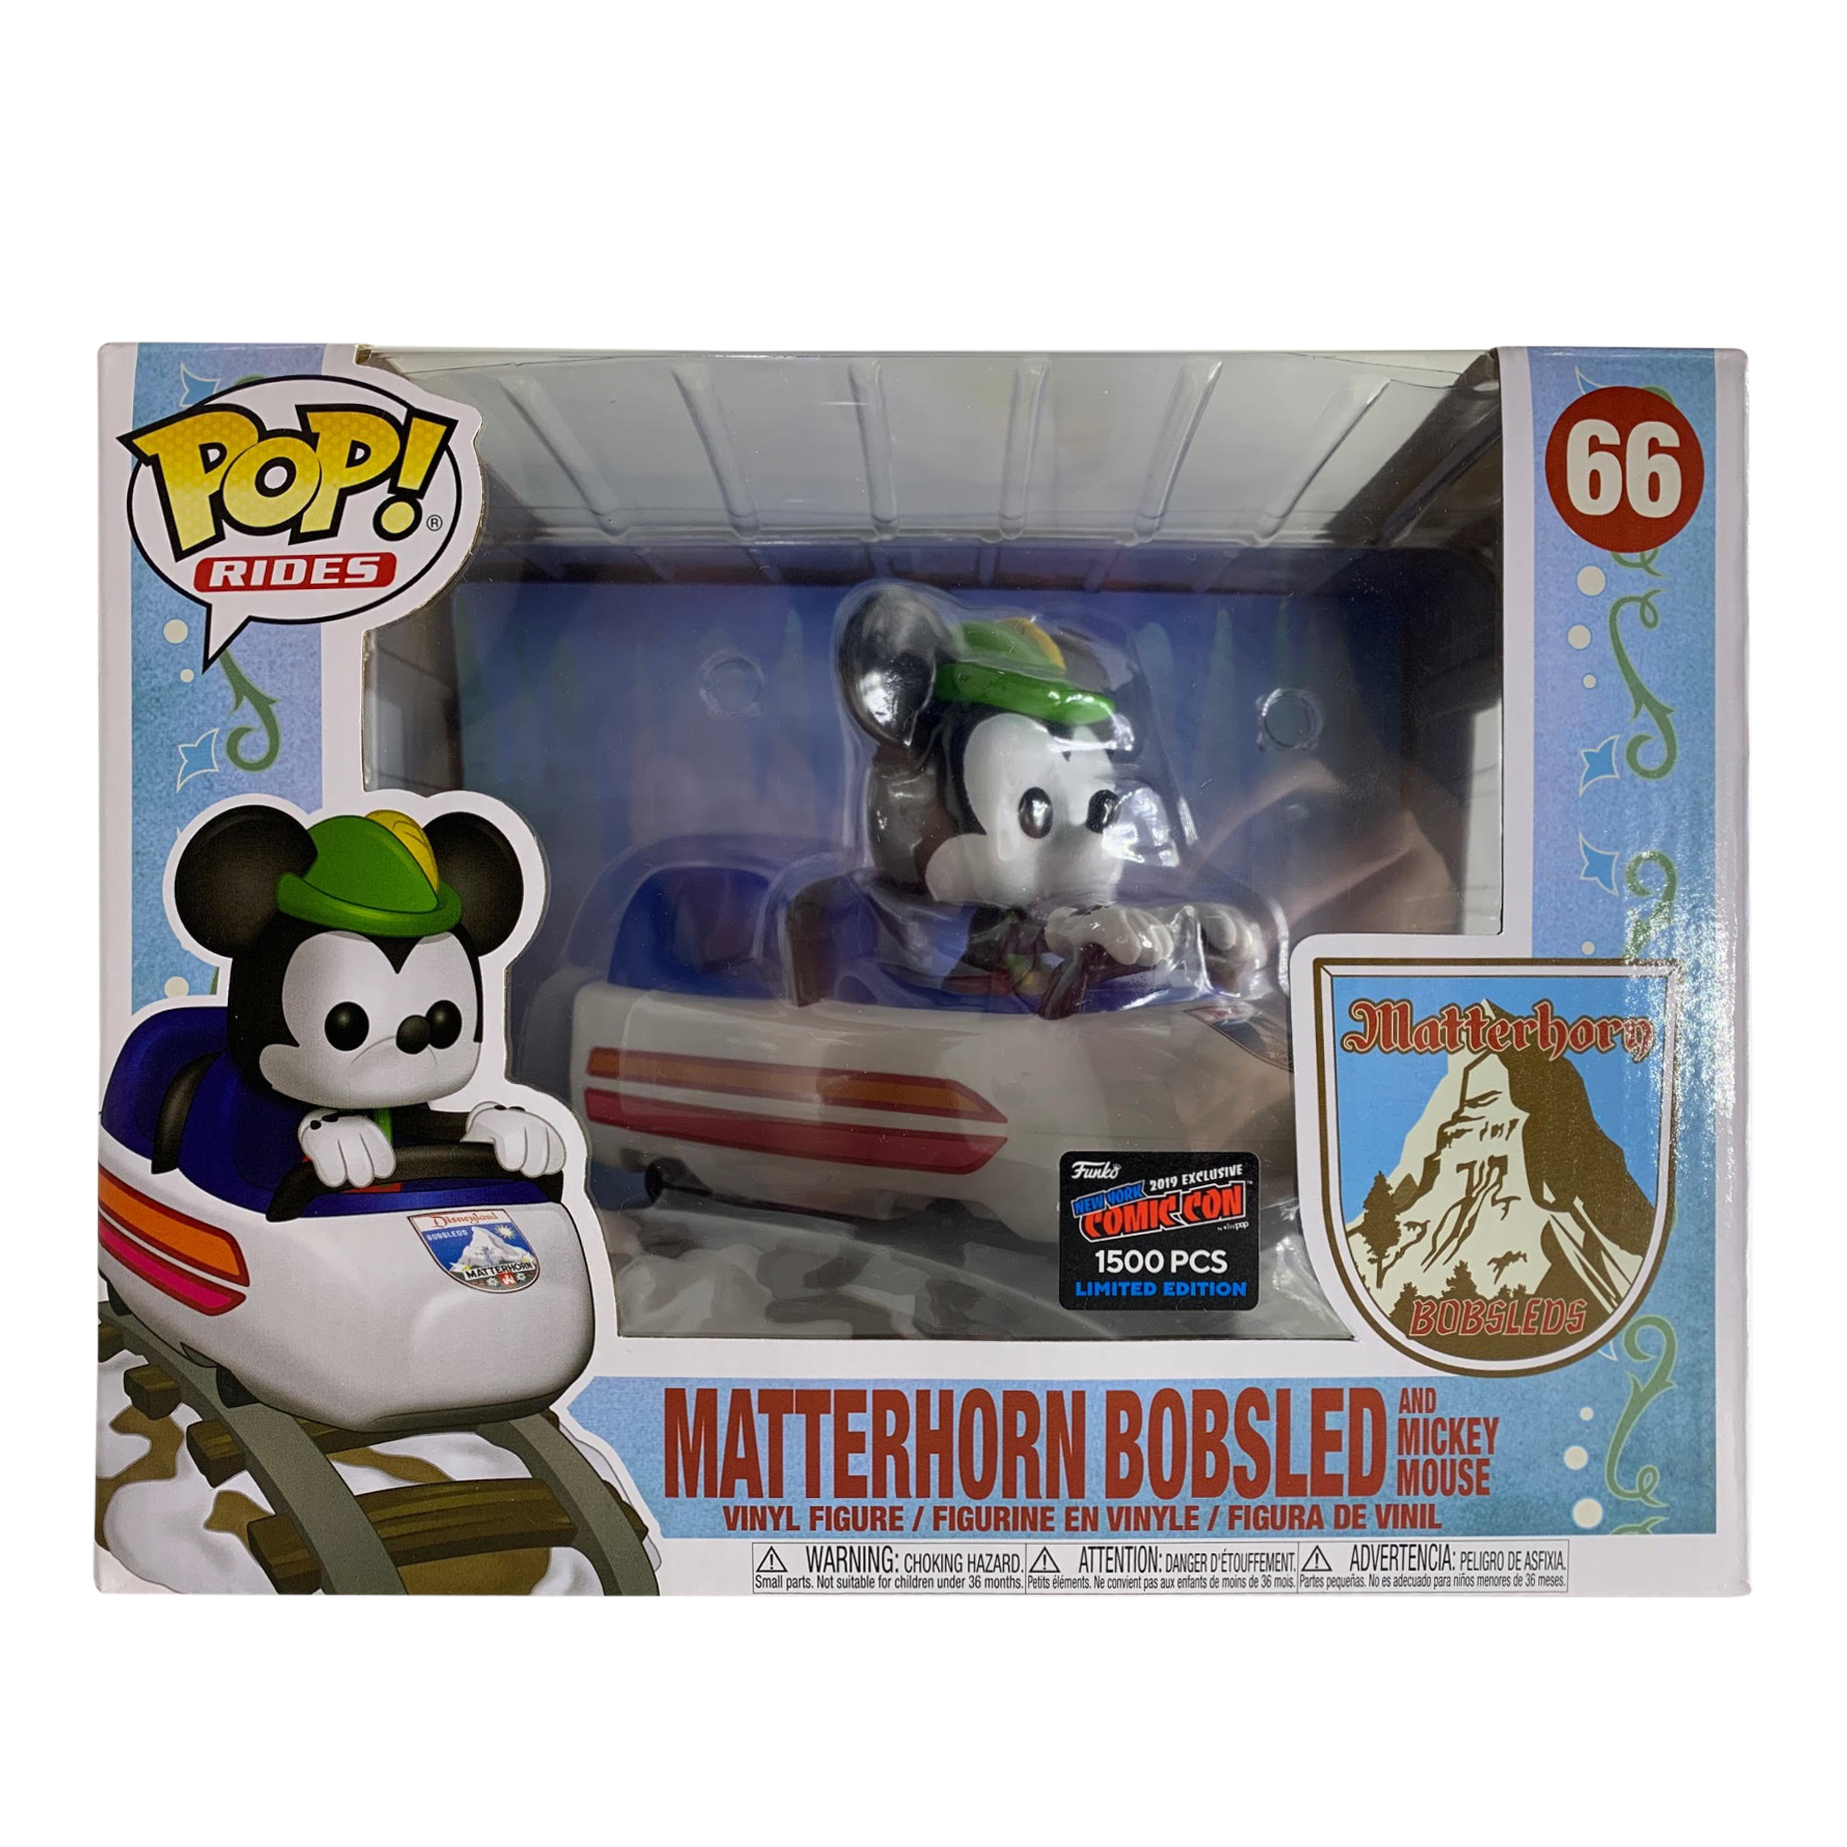 Funko Pop! Rides Disney Matterhorn Bobsled and Mickey Mouse NYCC 